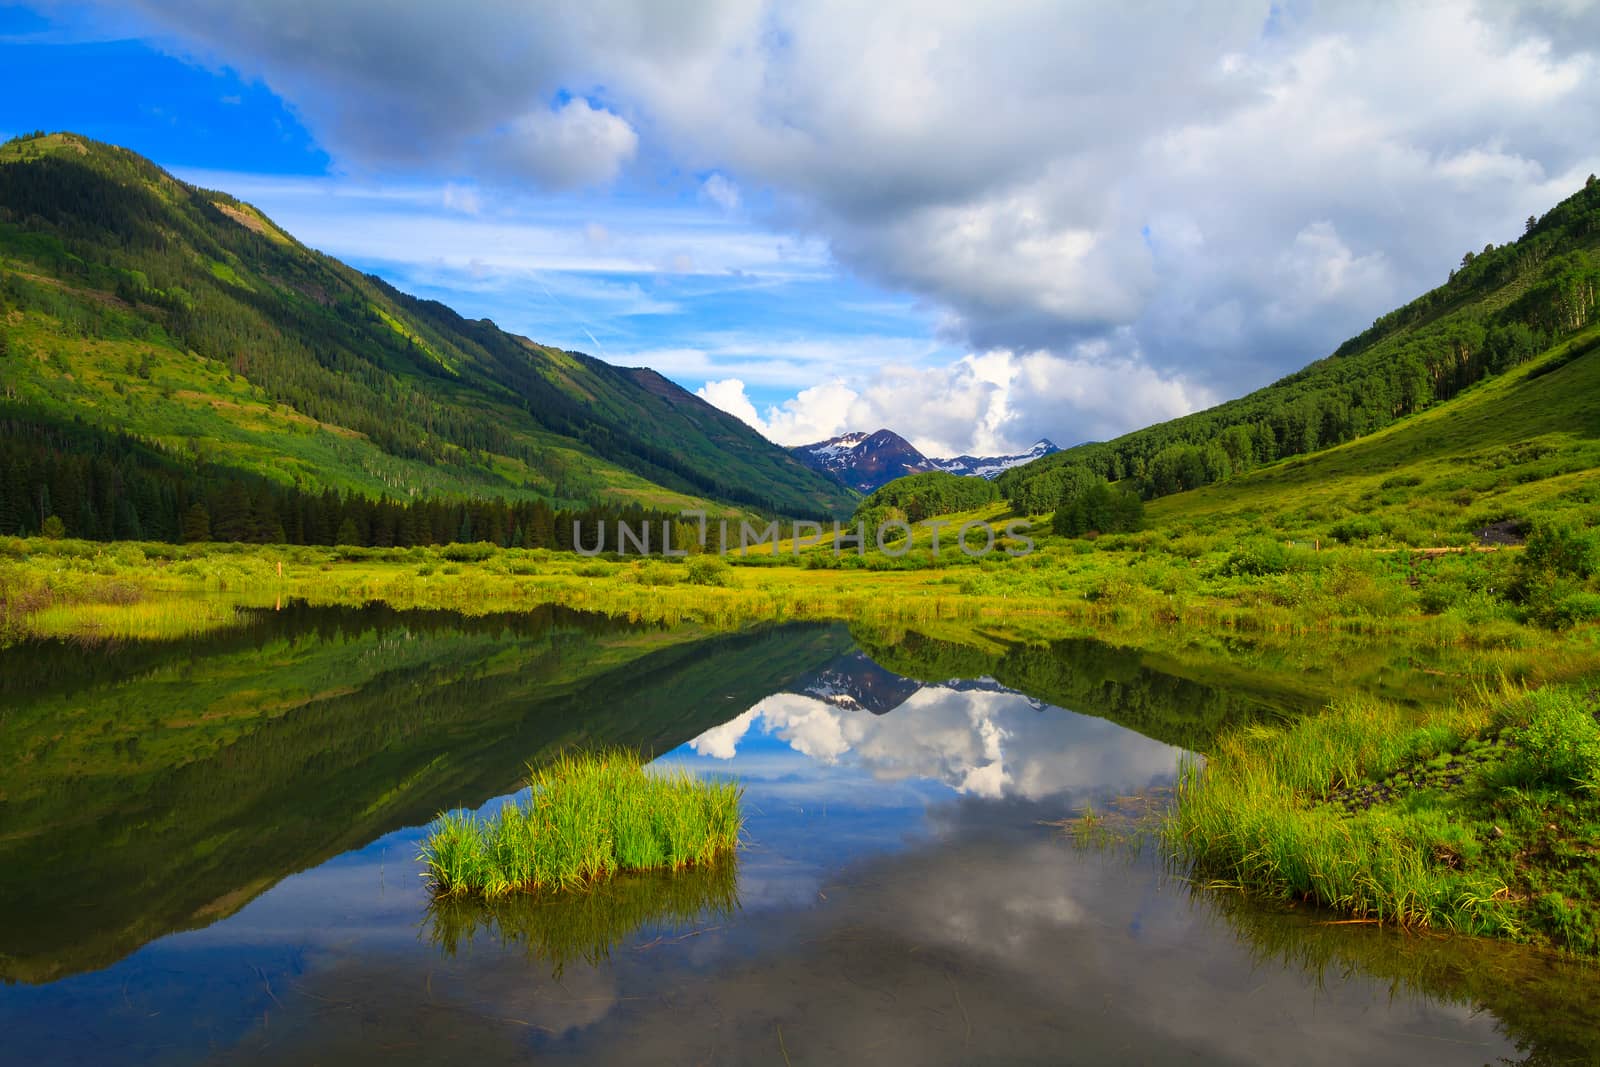 A view from Slate River at Crested Butte, Colorado in early July